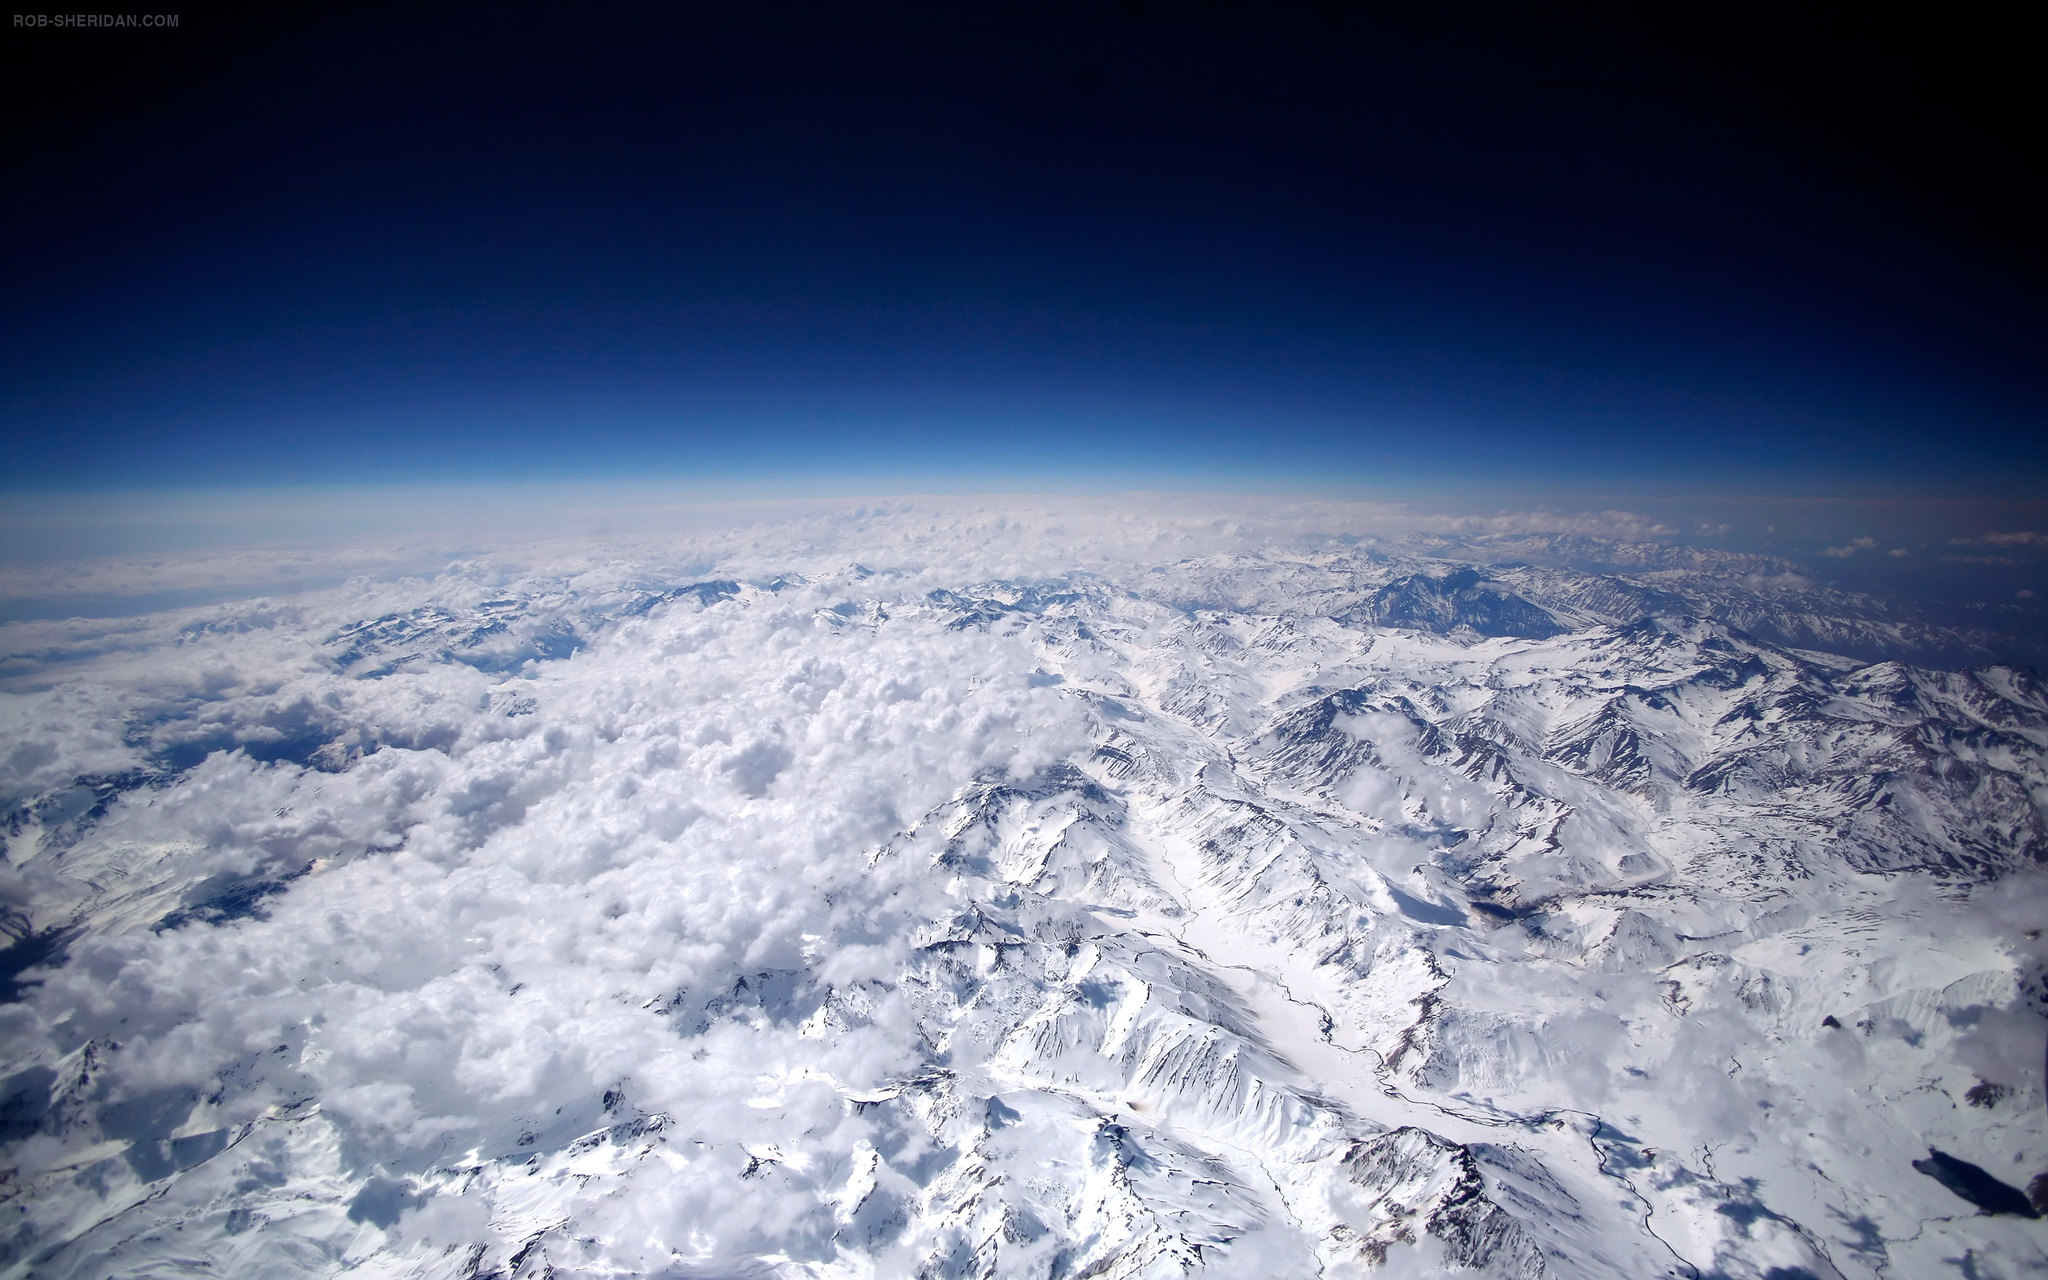 macbook pro retina wallpaper 2880x1800,atmosphere,sky,earth,outer space,mountain range